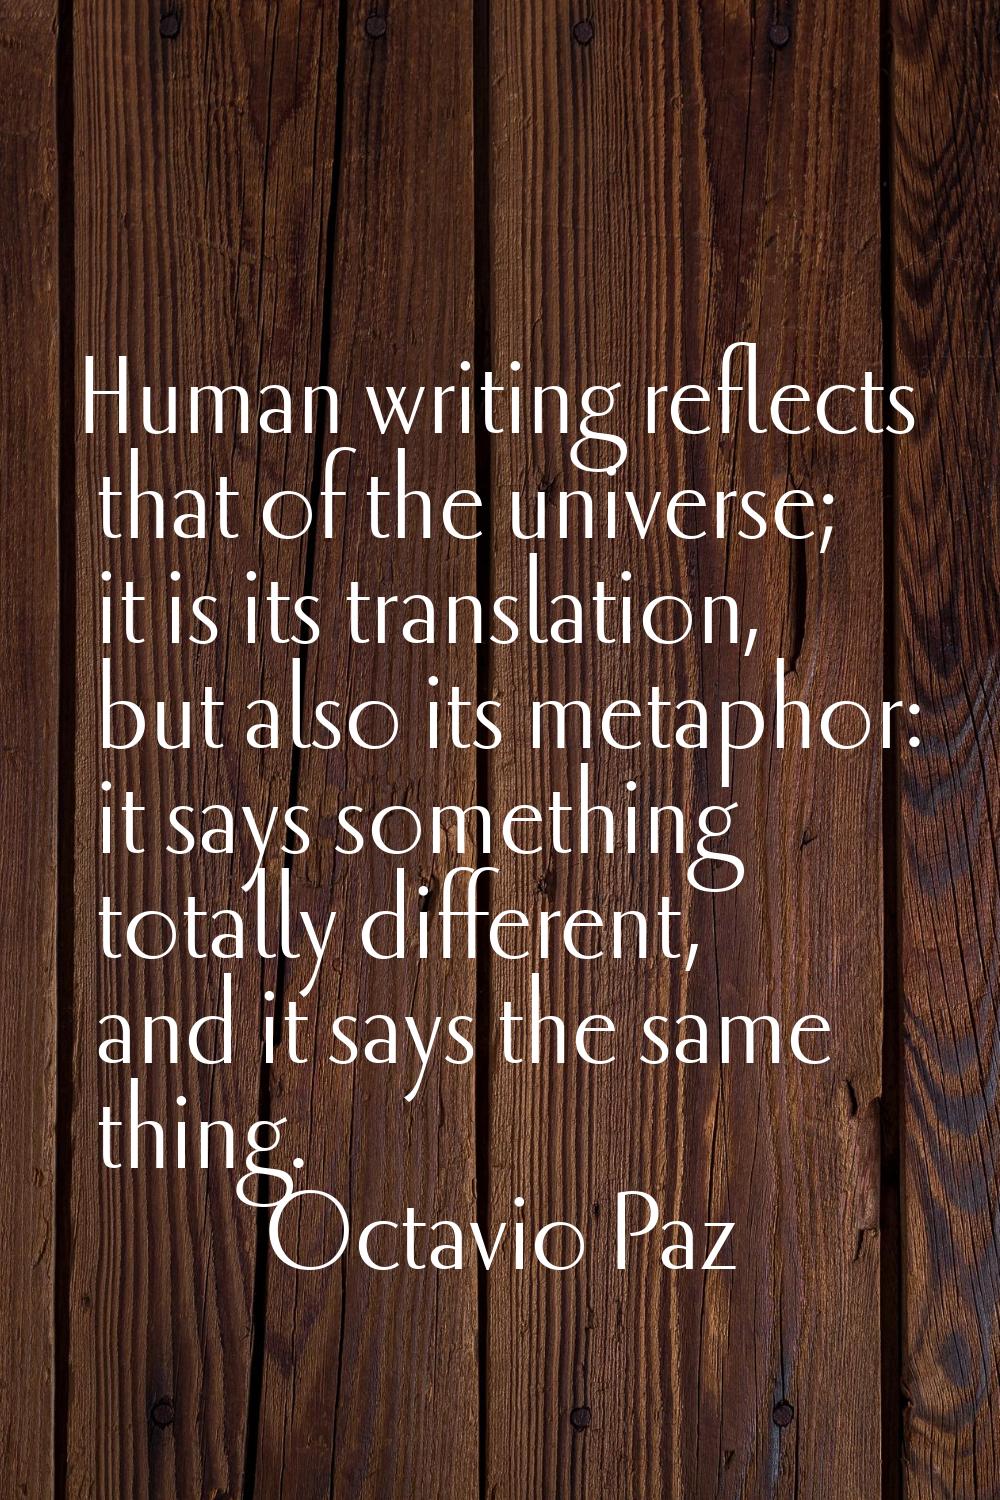 Human writing reflects that of the universe; it is its translation, but also its metaphor: it says 